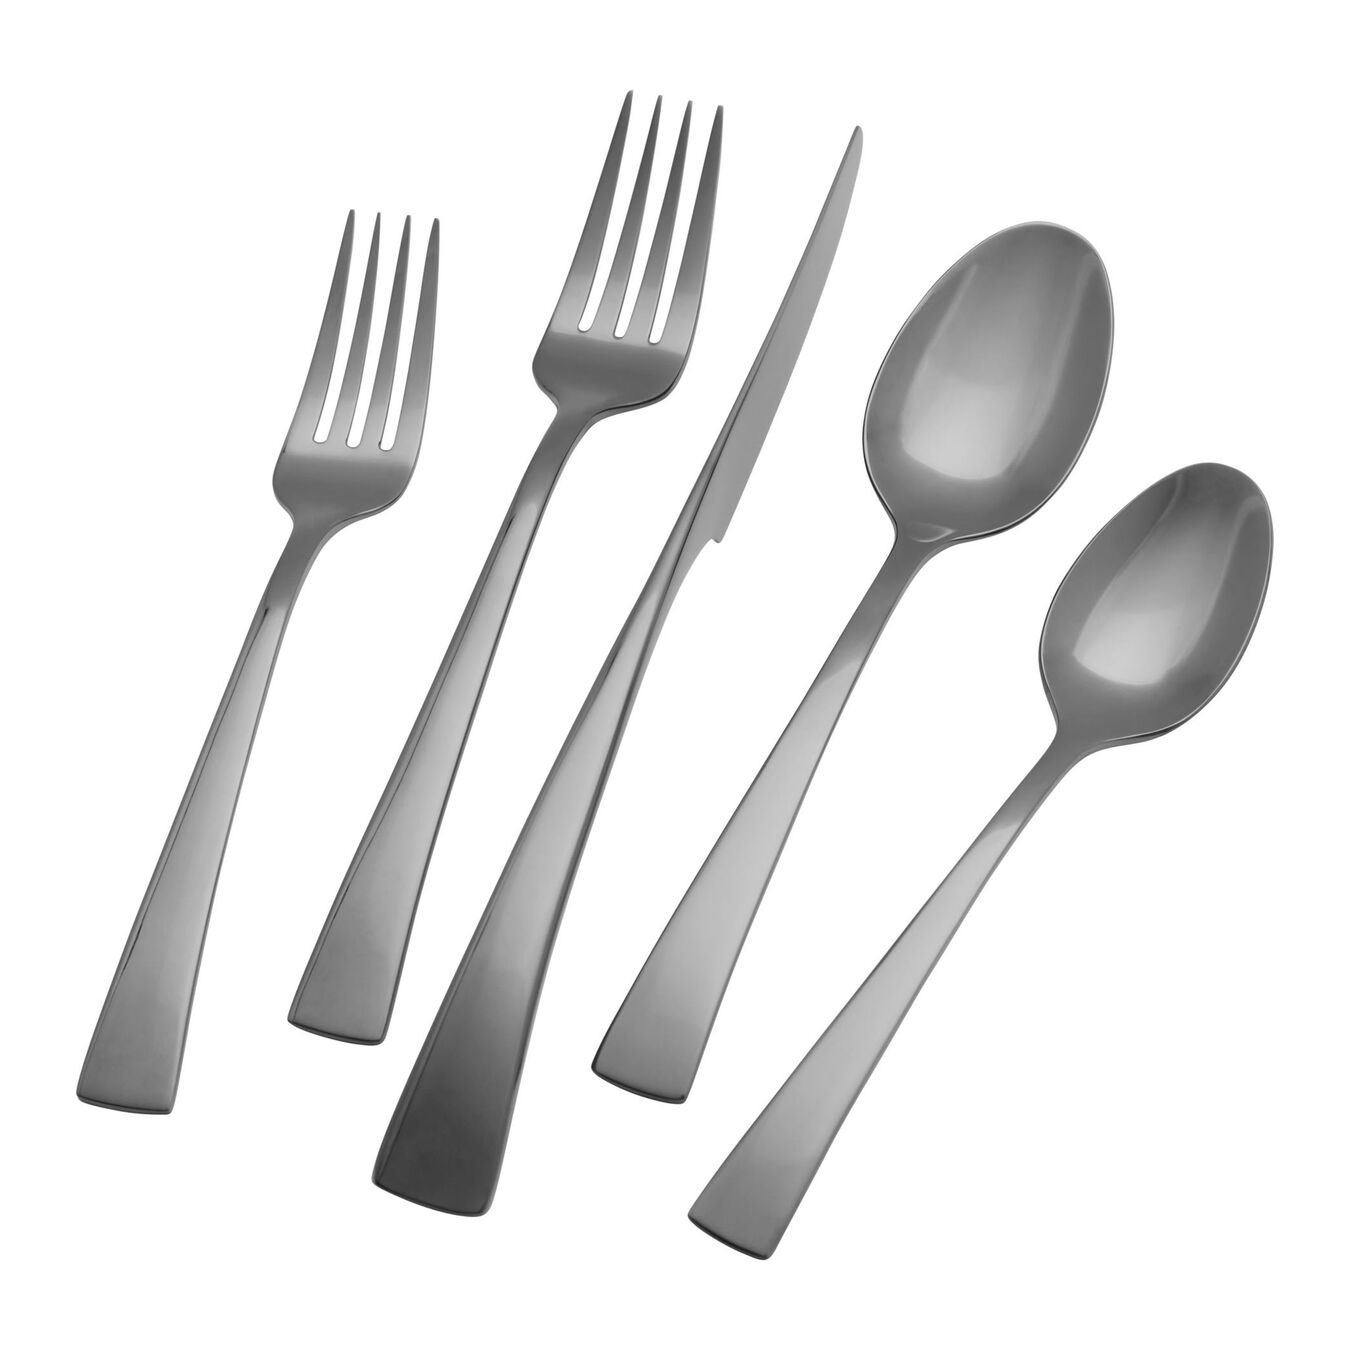 5 pieces of bellasera slate flatware displayed on a white background